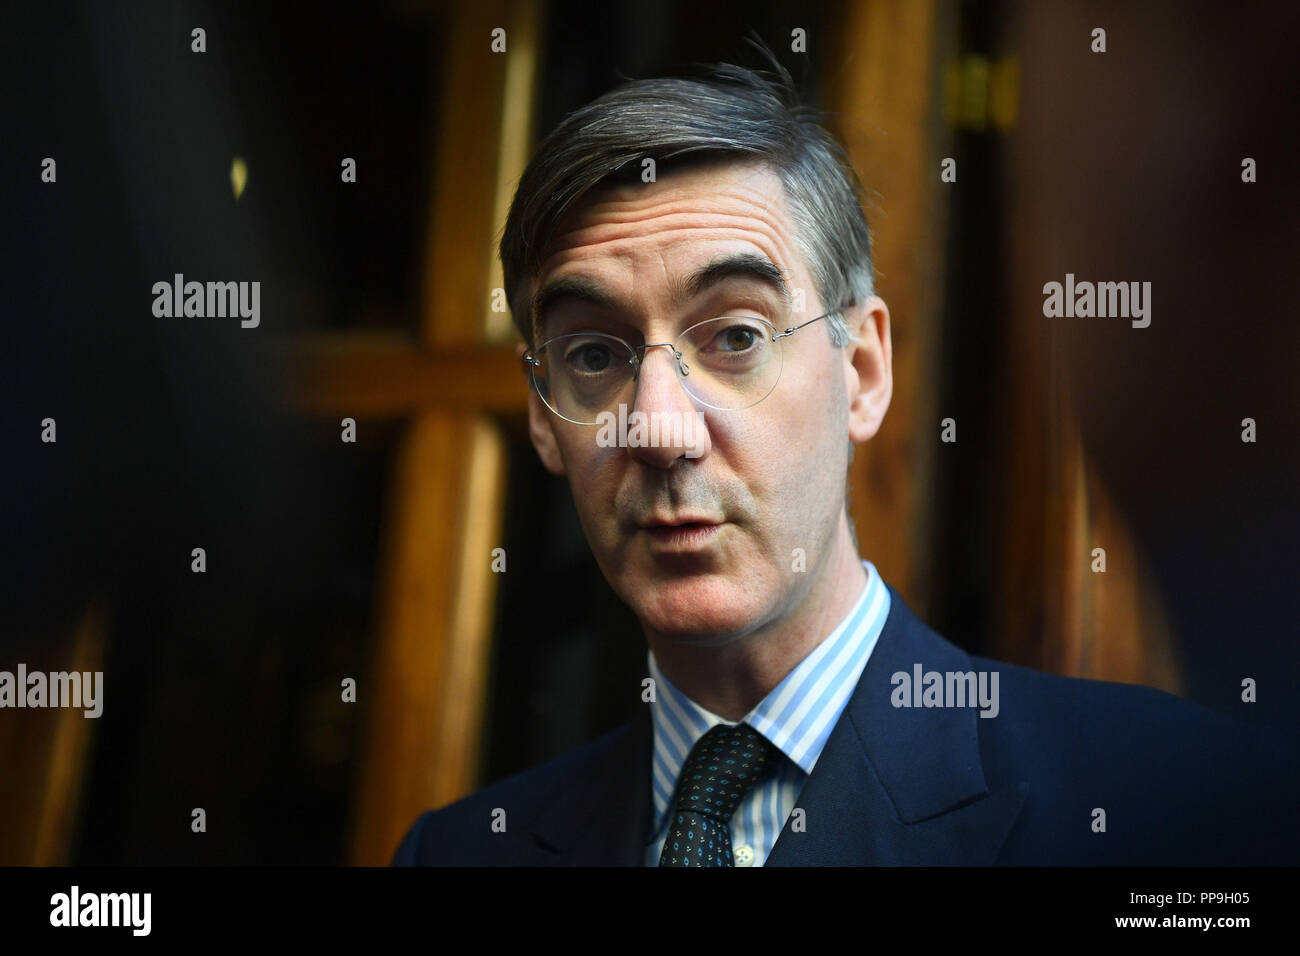 Jacob Rees-Mogg MP arrives at the launch of the Institute of Economic Affairs Brexit research paper, in central London. Stock Photo